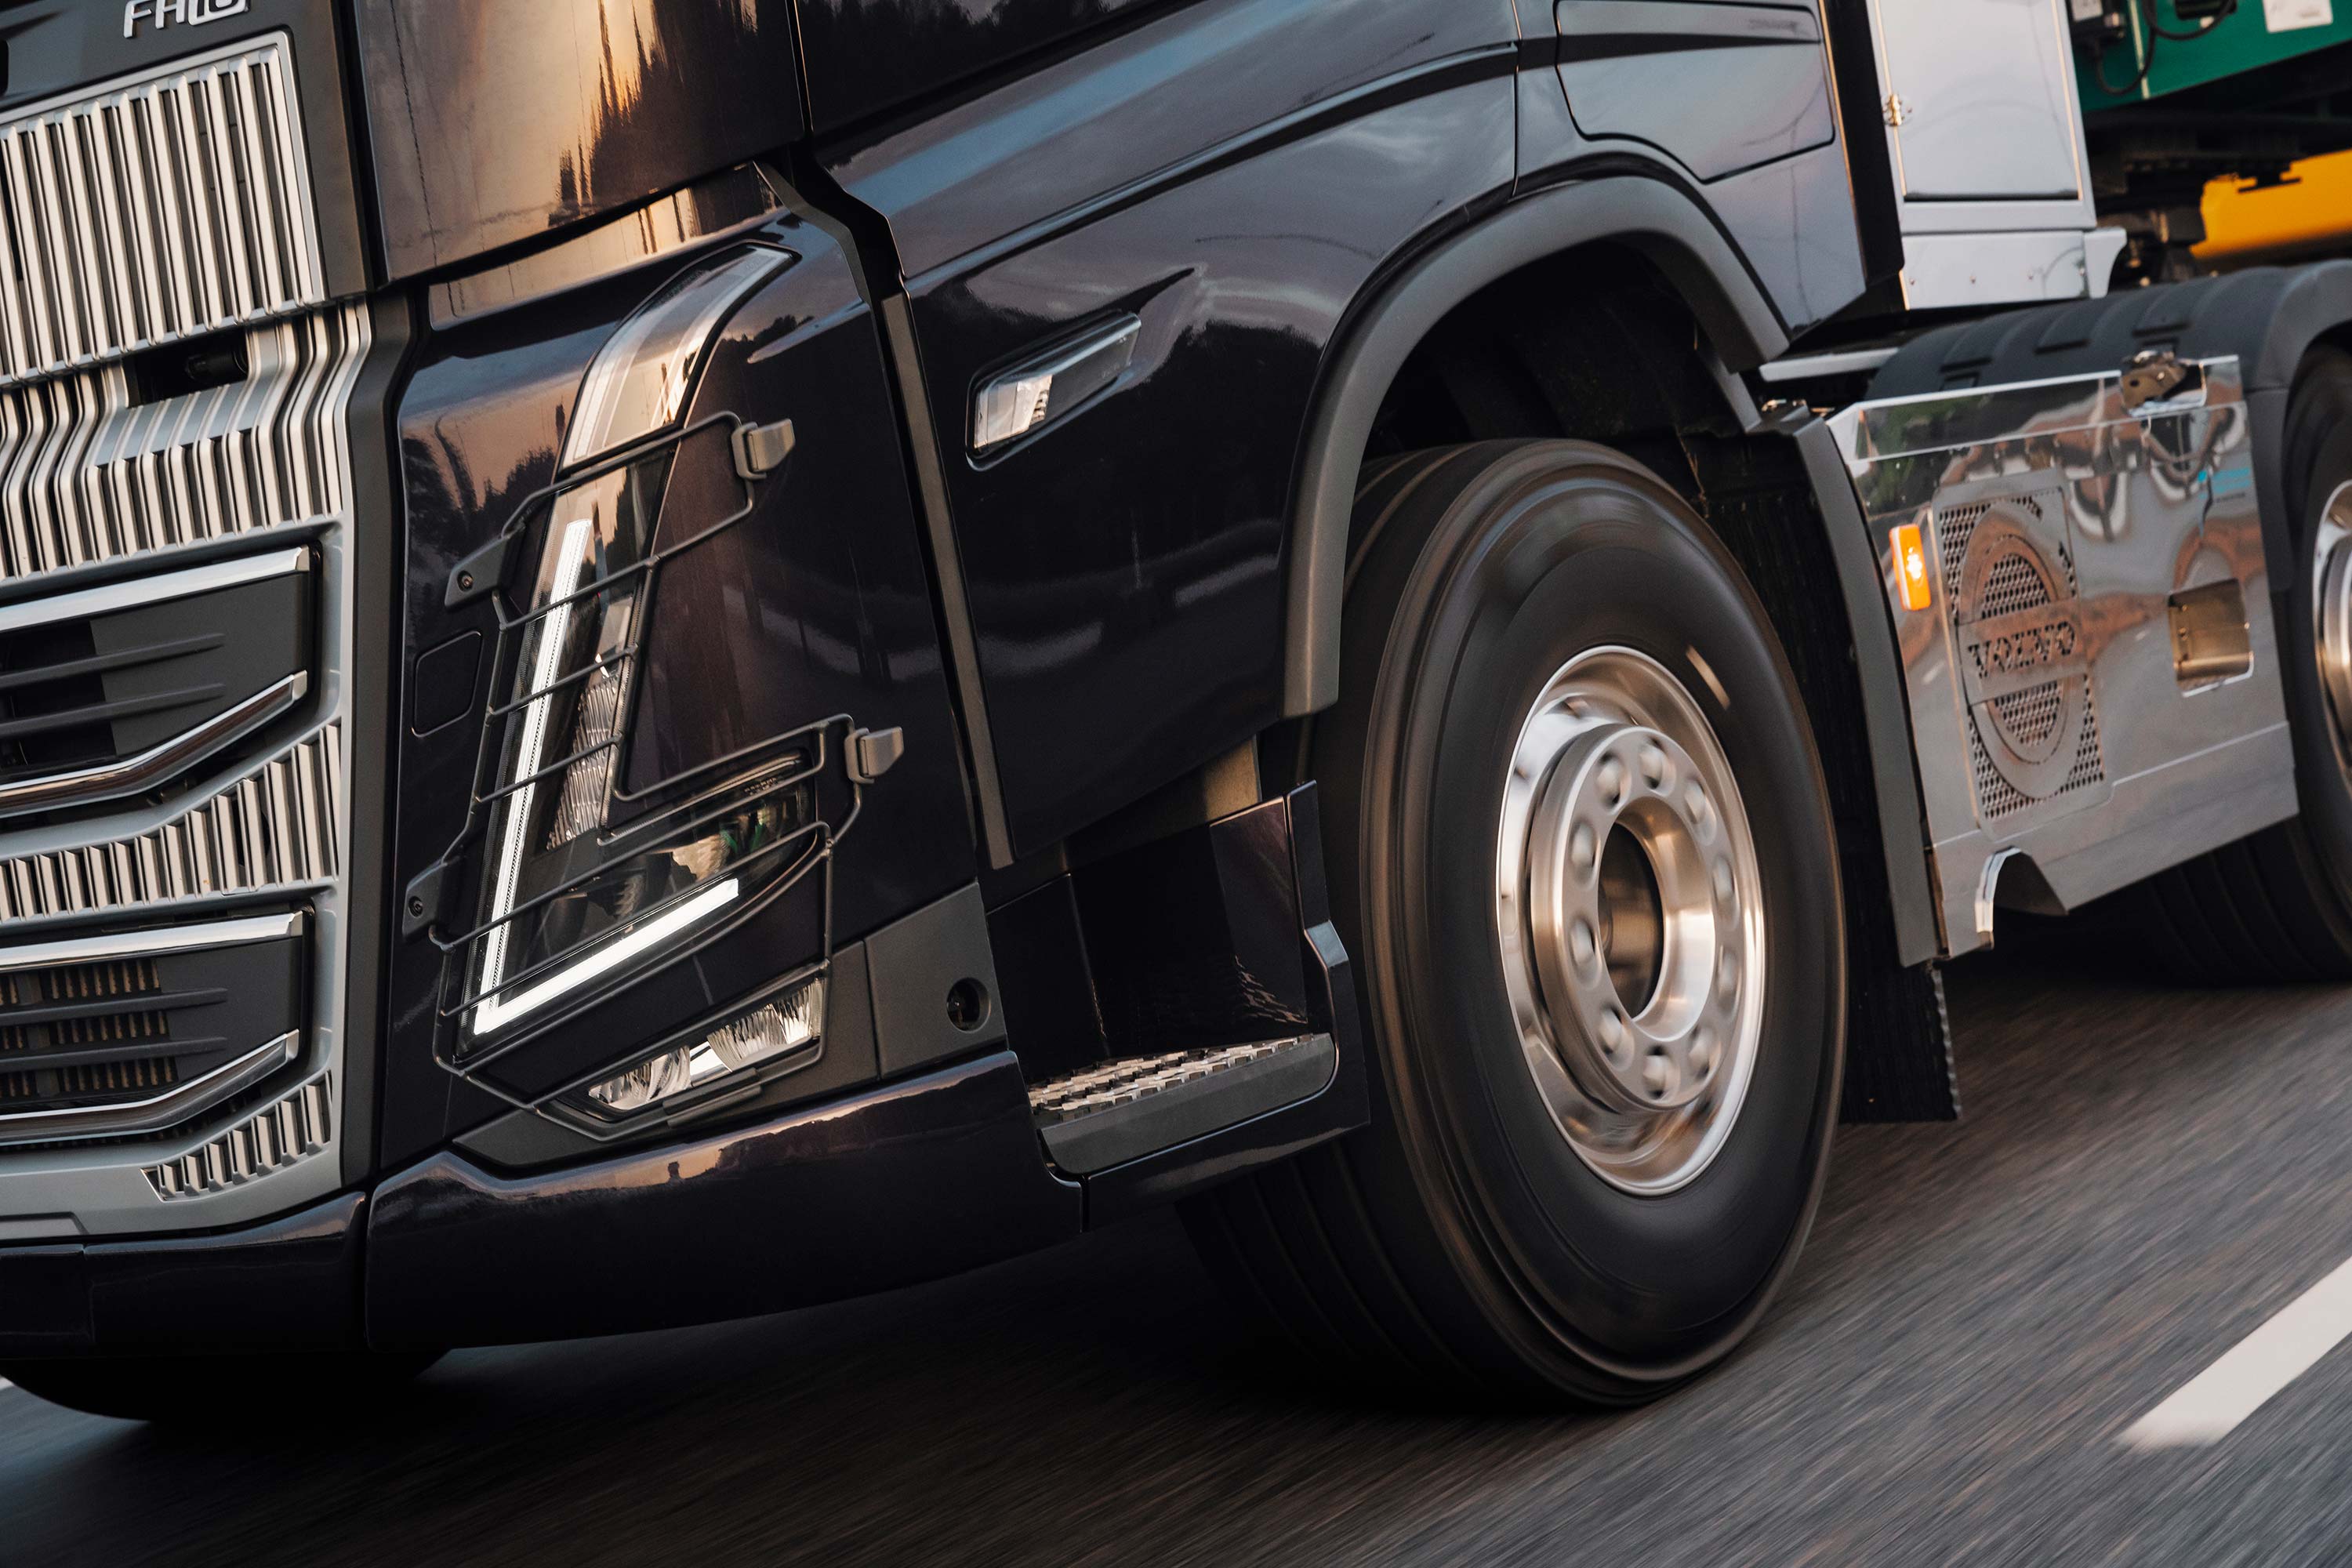 The Volvo FH16 is clearly a powerful tool.